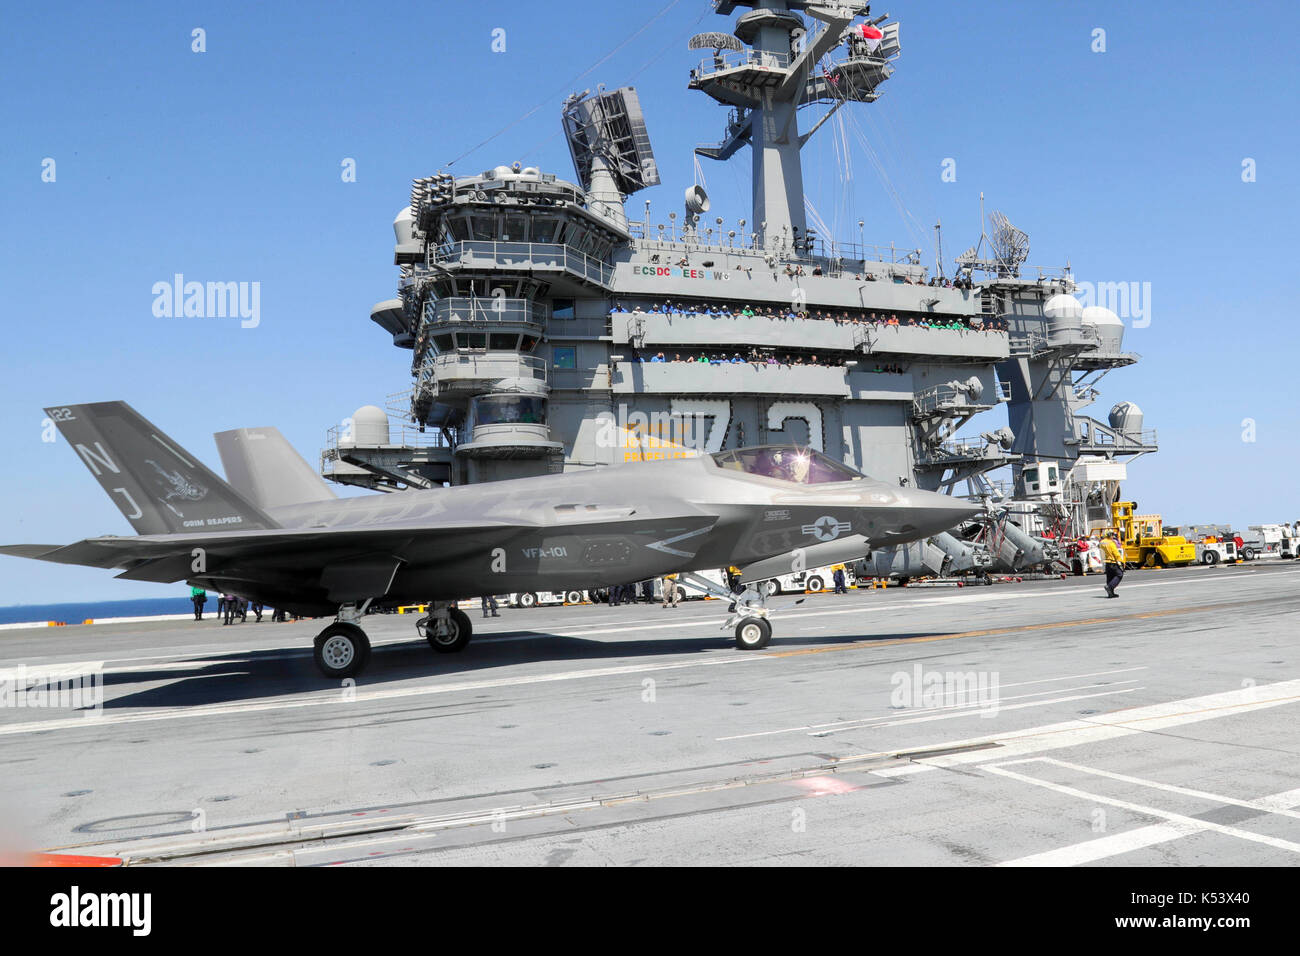 170904-N-CT127-0134 ATLANTIC OCEAN (Sept. 4, 2017) An F-35C Lightning II, from the “Grim Reapers” of Strike Fighter Squadron (VFA) 101, taxies around  Stock Photo